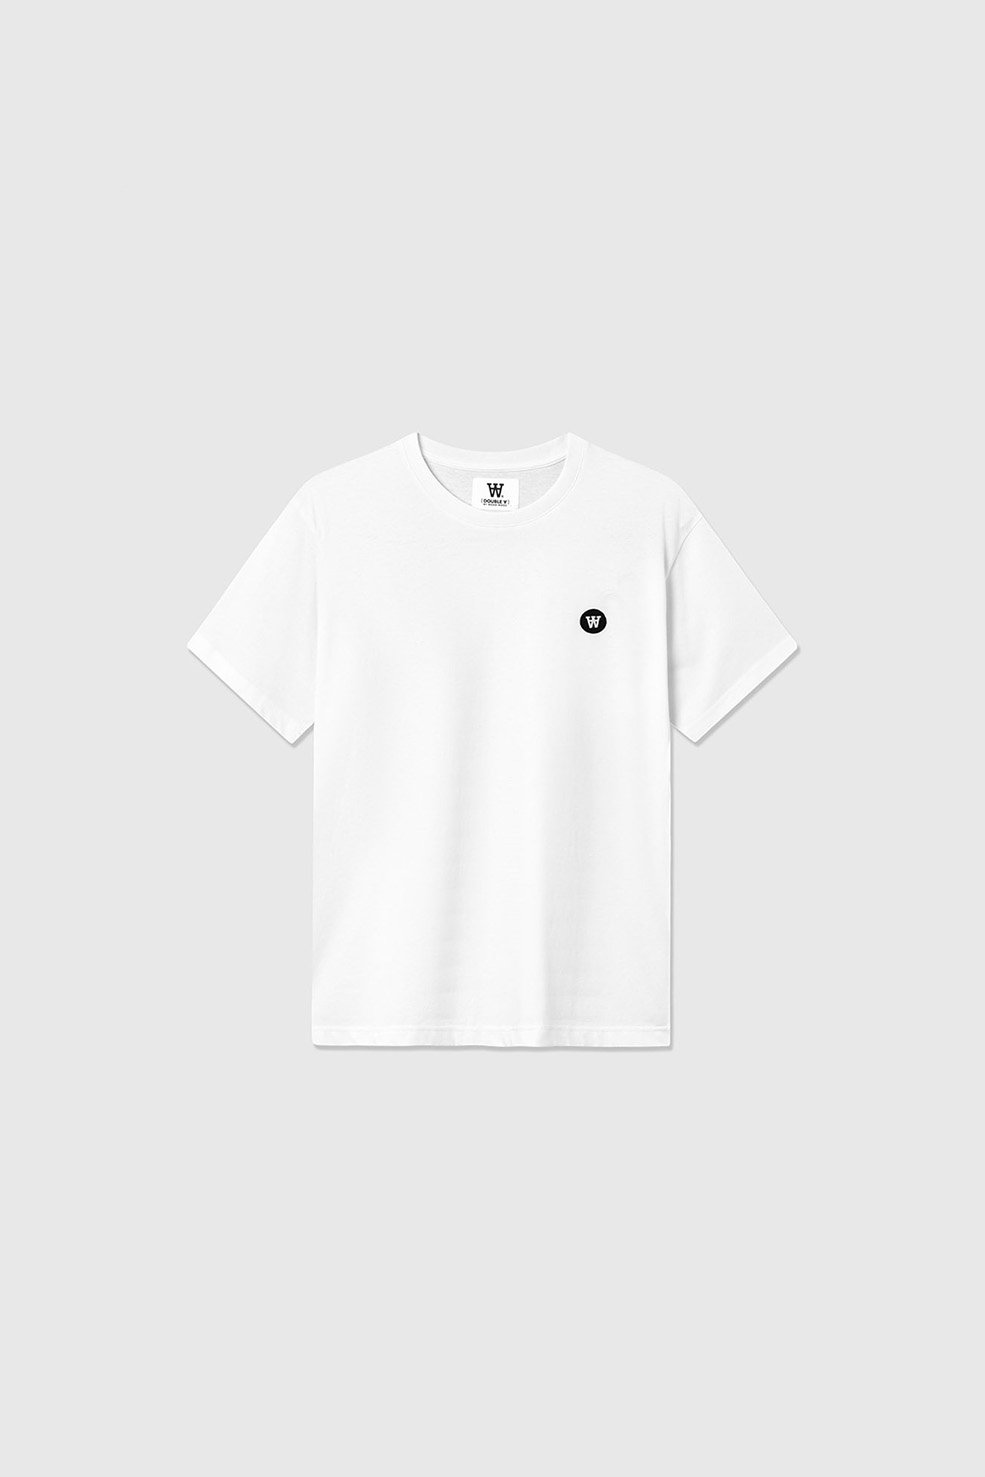 Double A by Wood Wood Ace badge T-shirt White | WoodWood.com